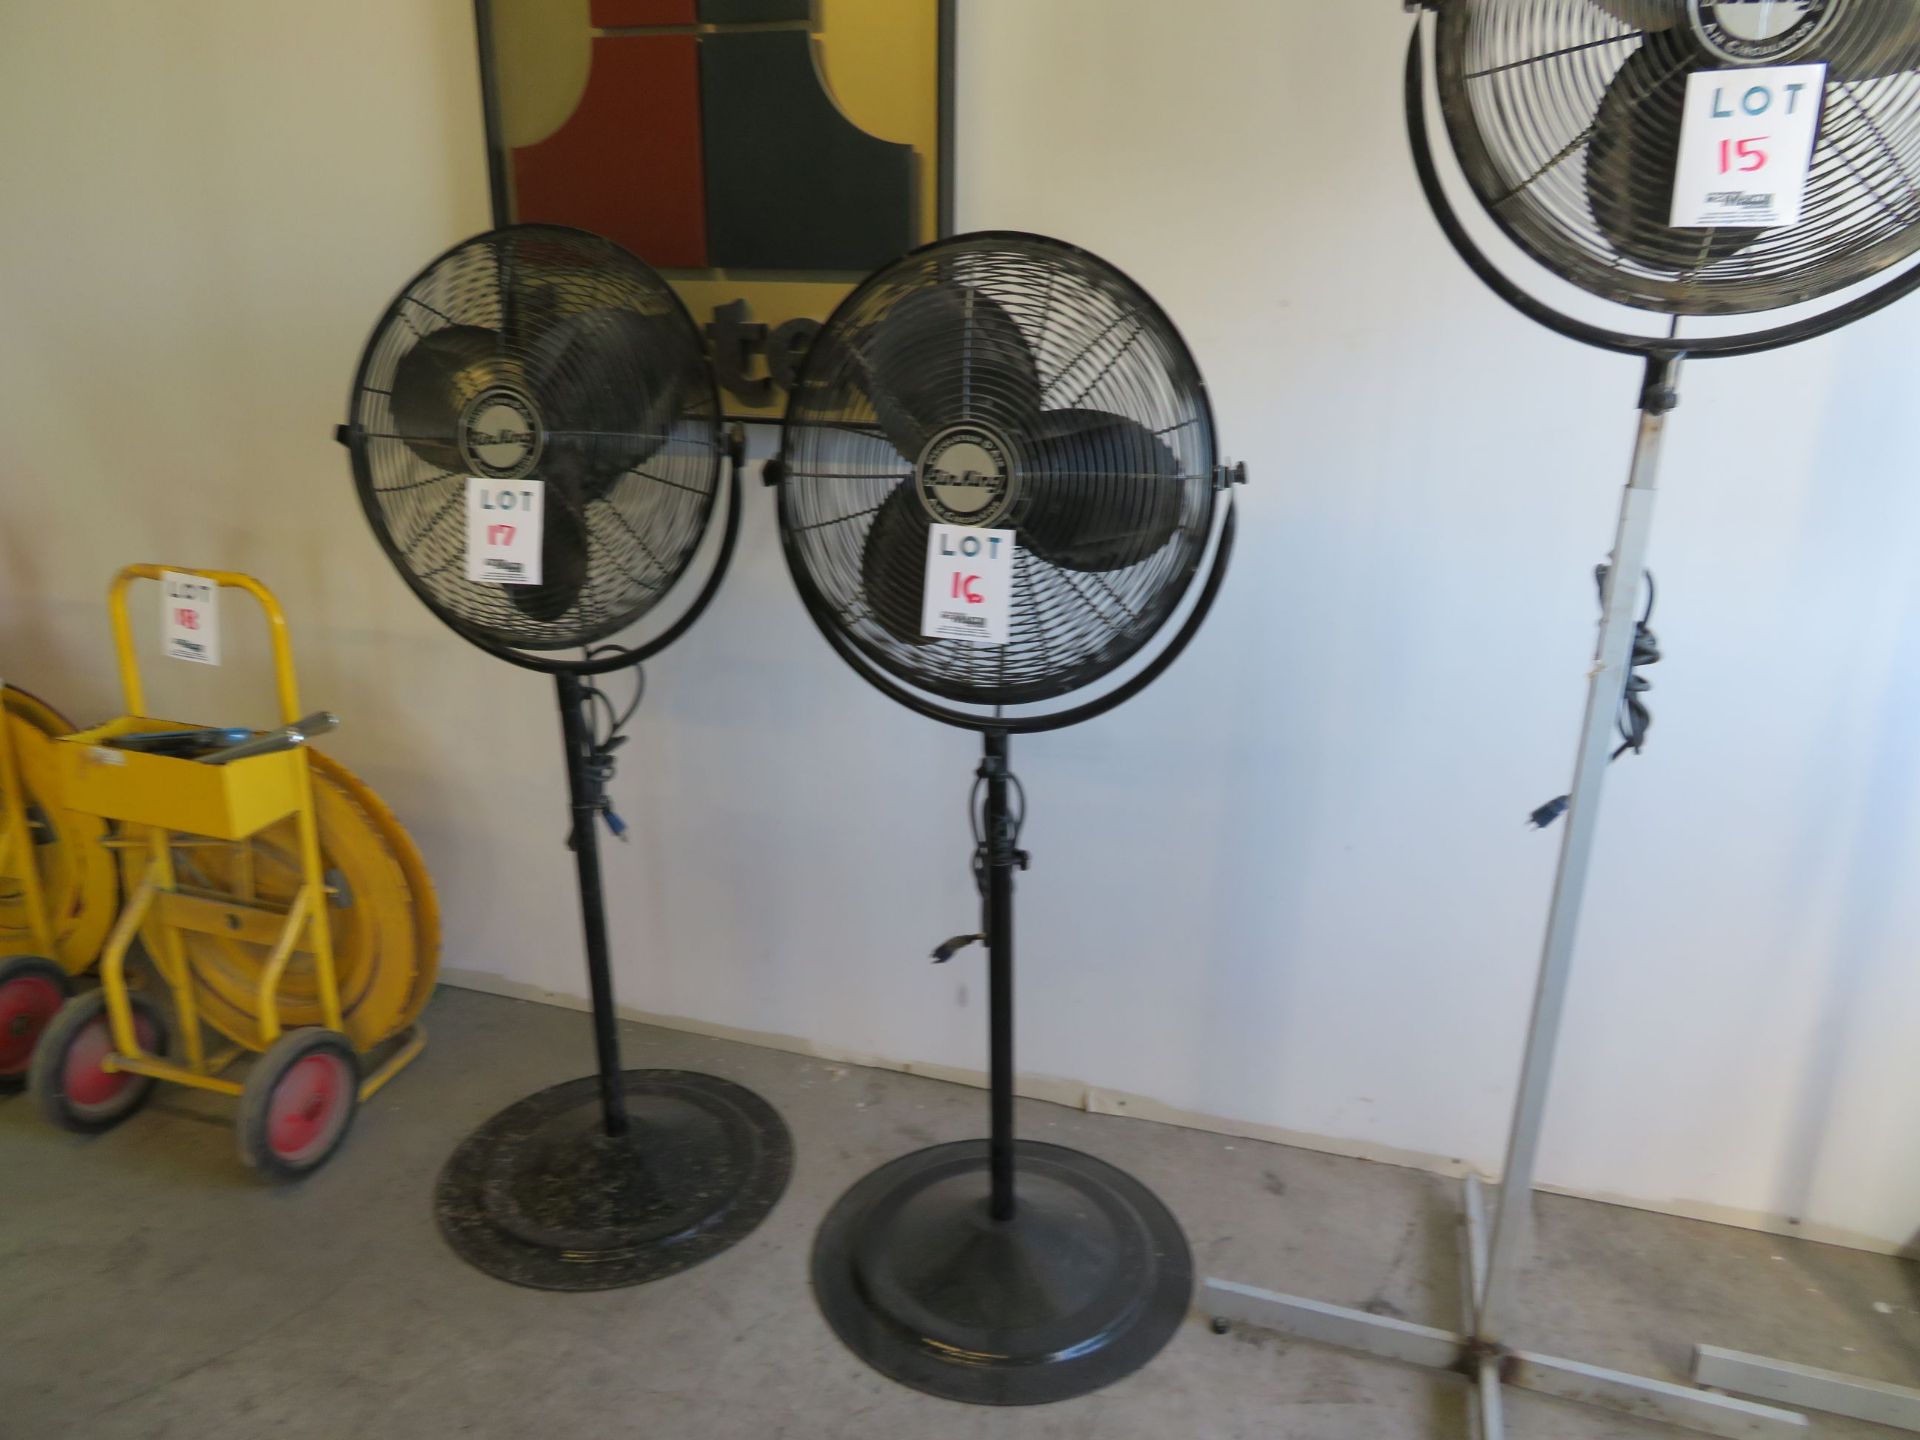 AIR KING fan on stand